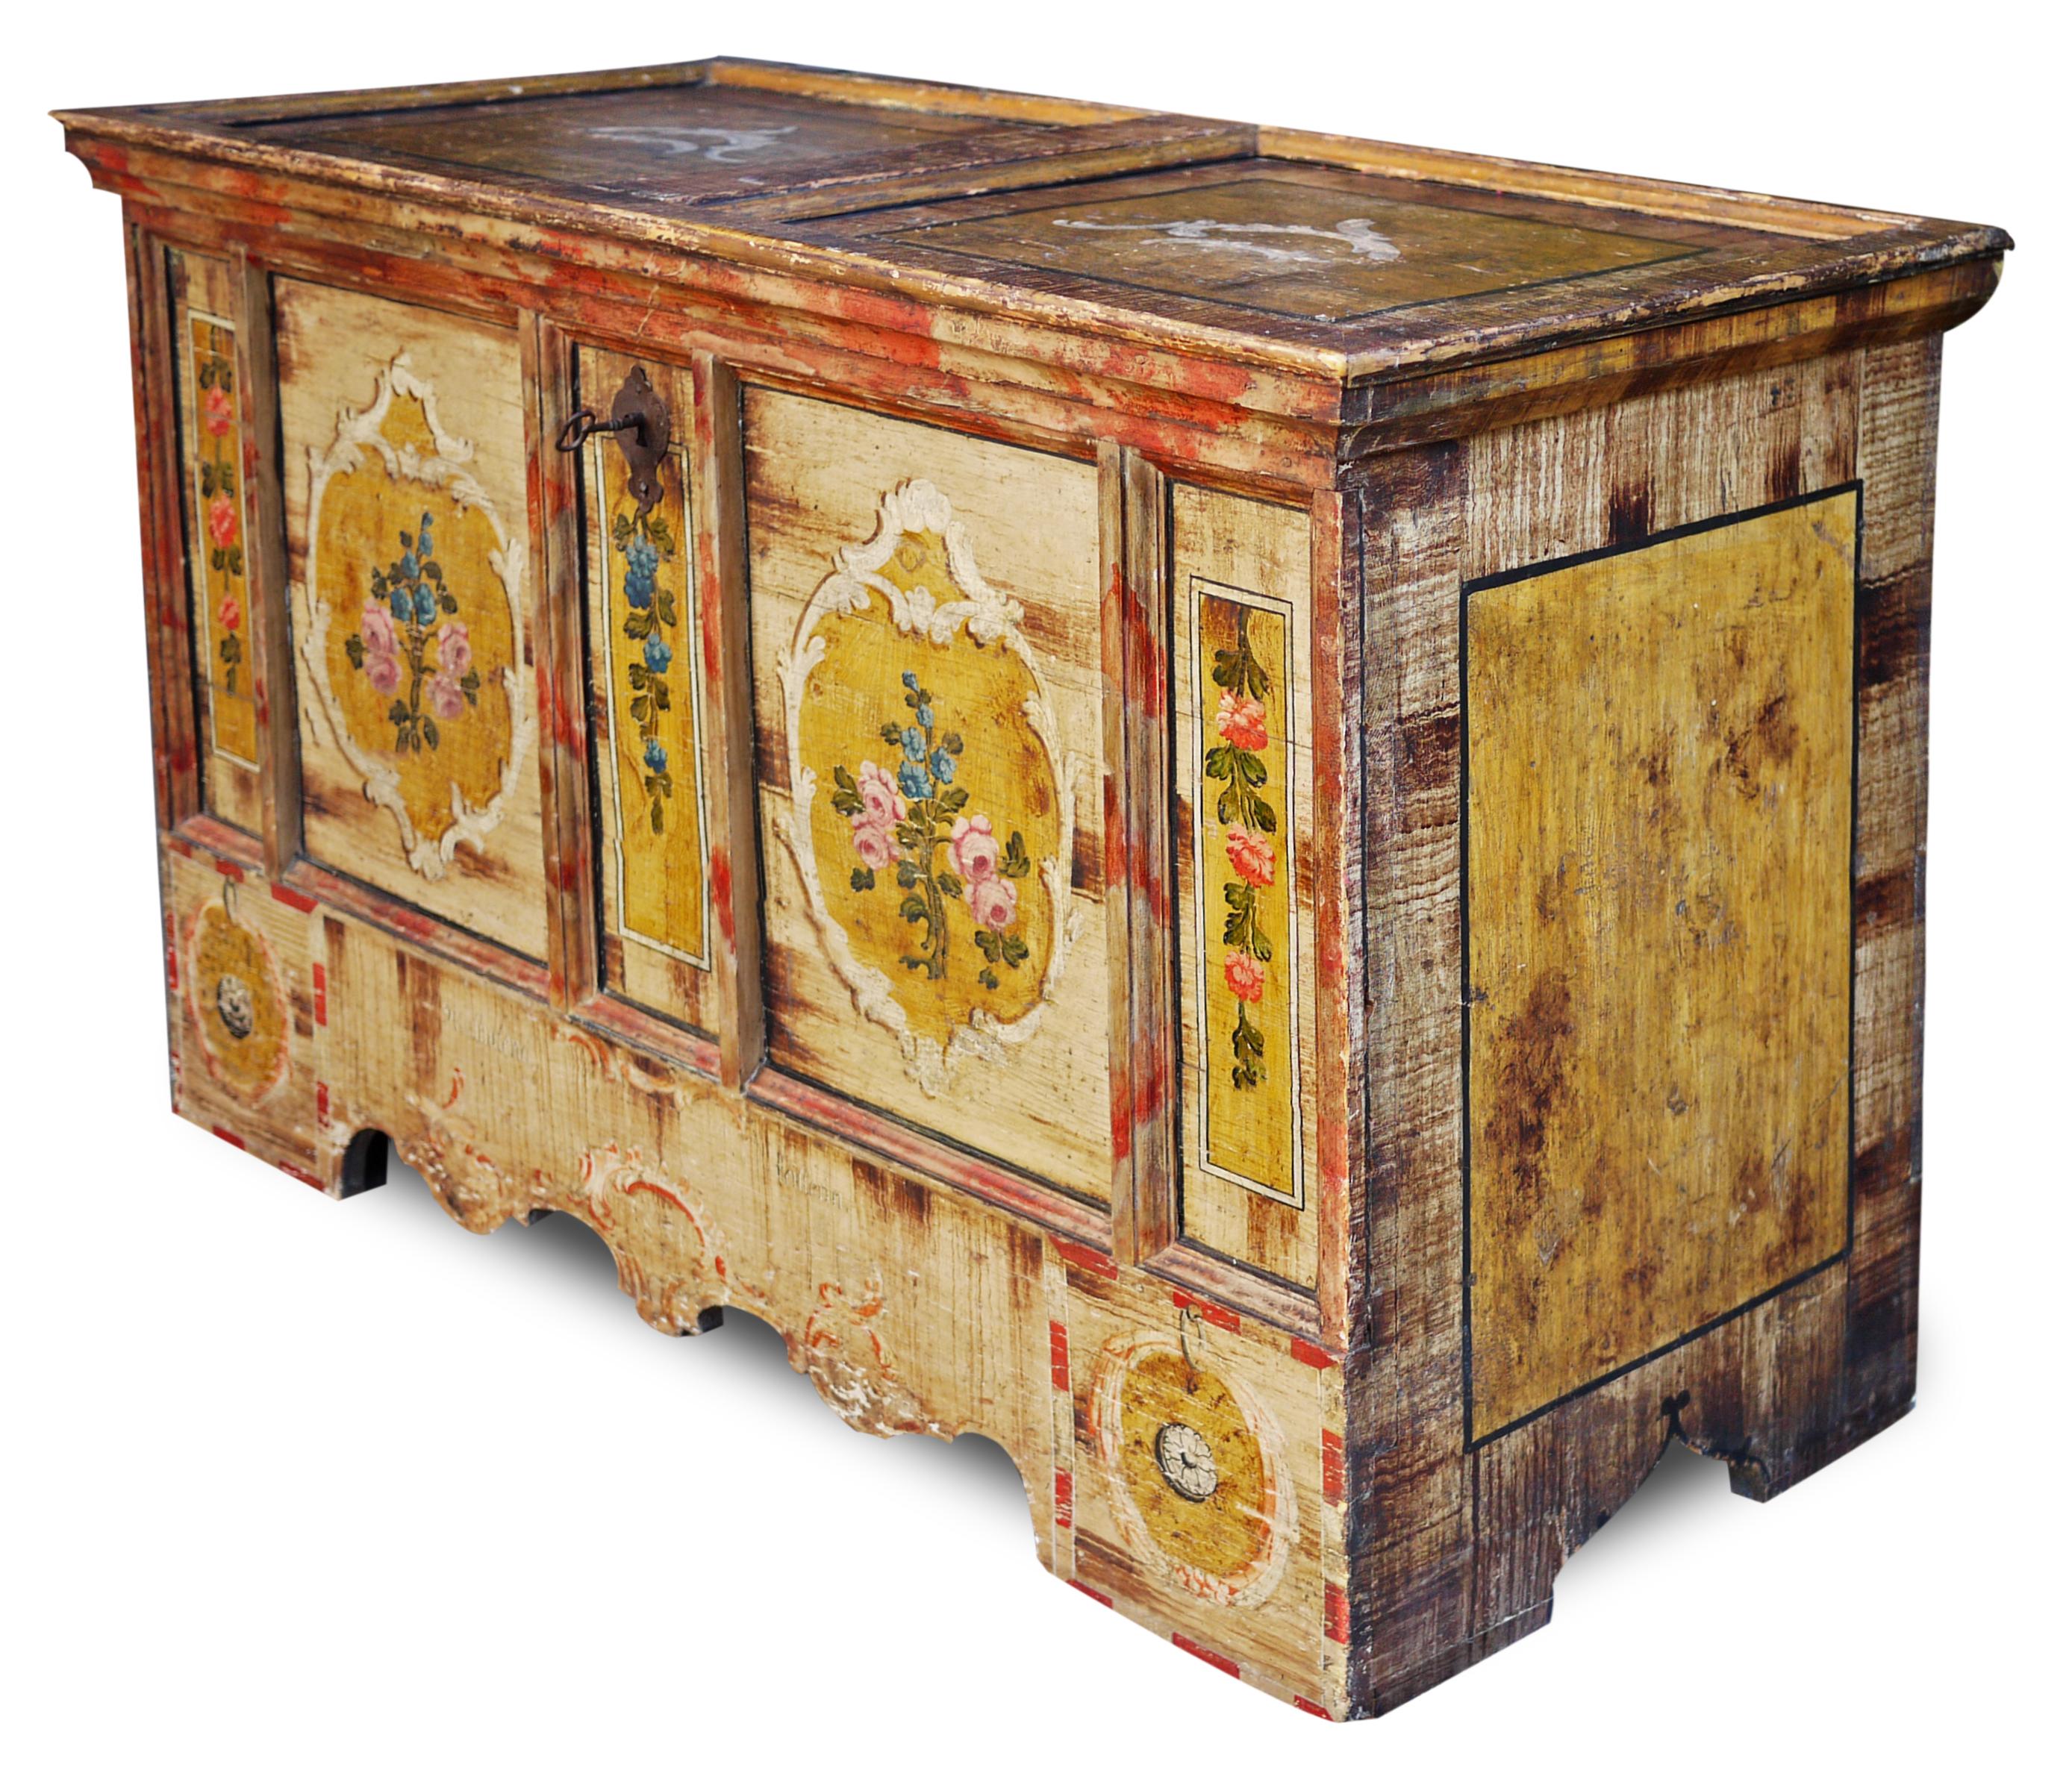 Antique floral painted tyrolean painted chest

Measures: H. 83cm – L. 131cm – P. 62cm

Antique painted chest, with light background.
The front has five backgrounds with floral decorations; in the lower cornice we find two mirrored garlands on